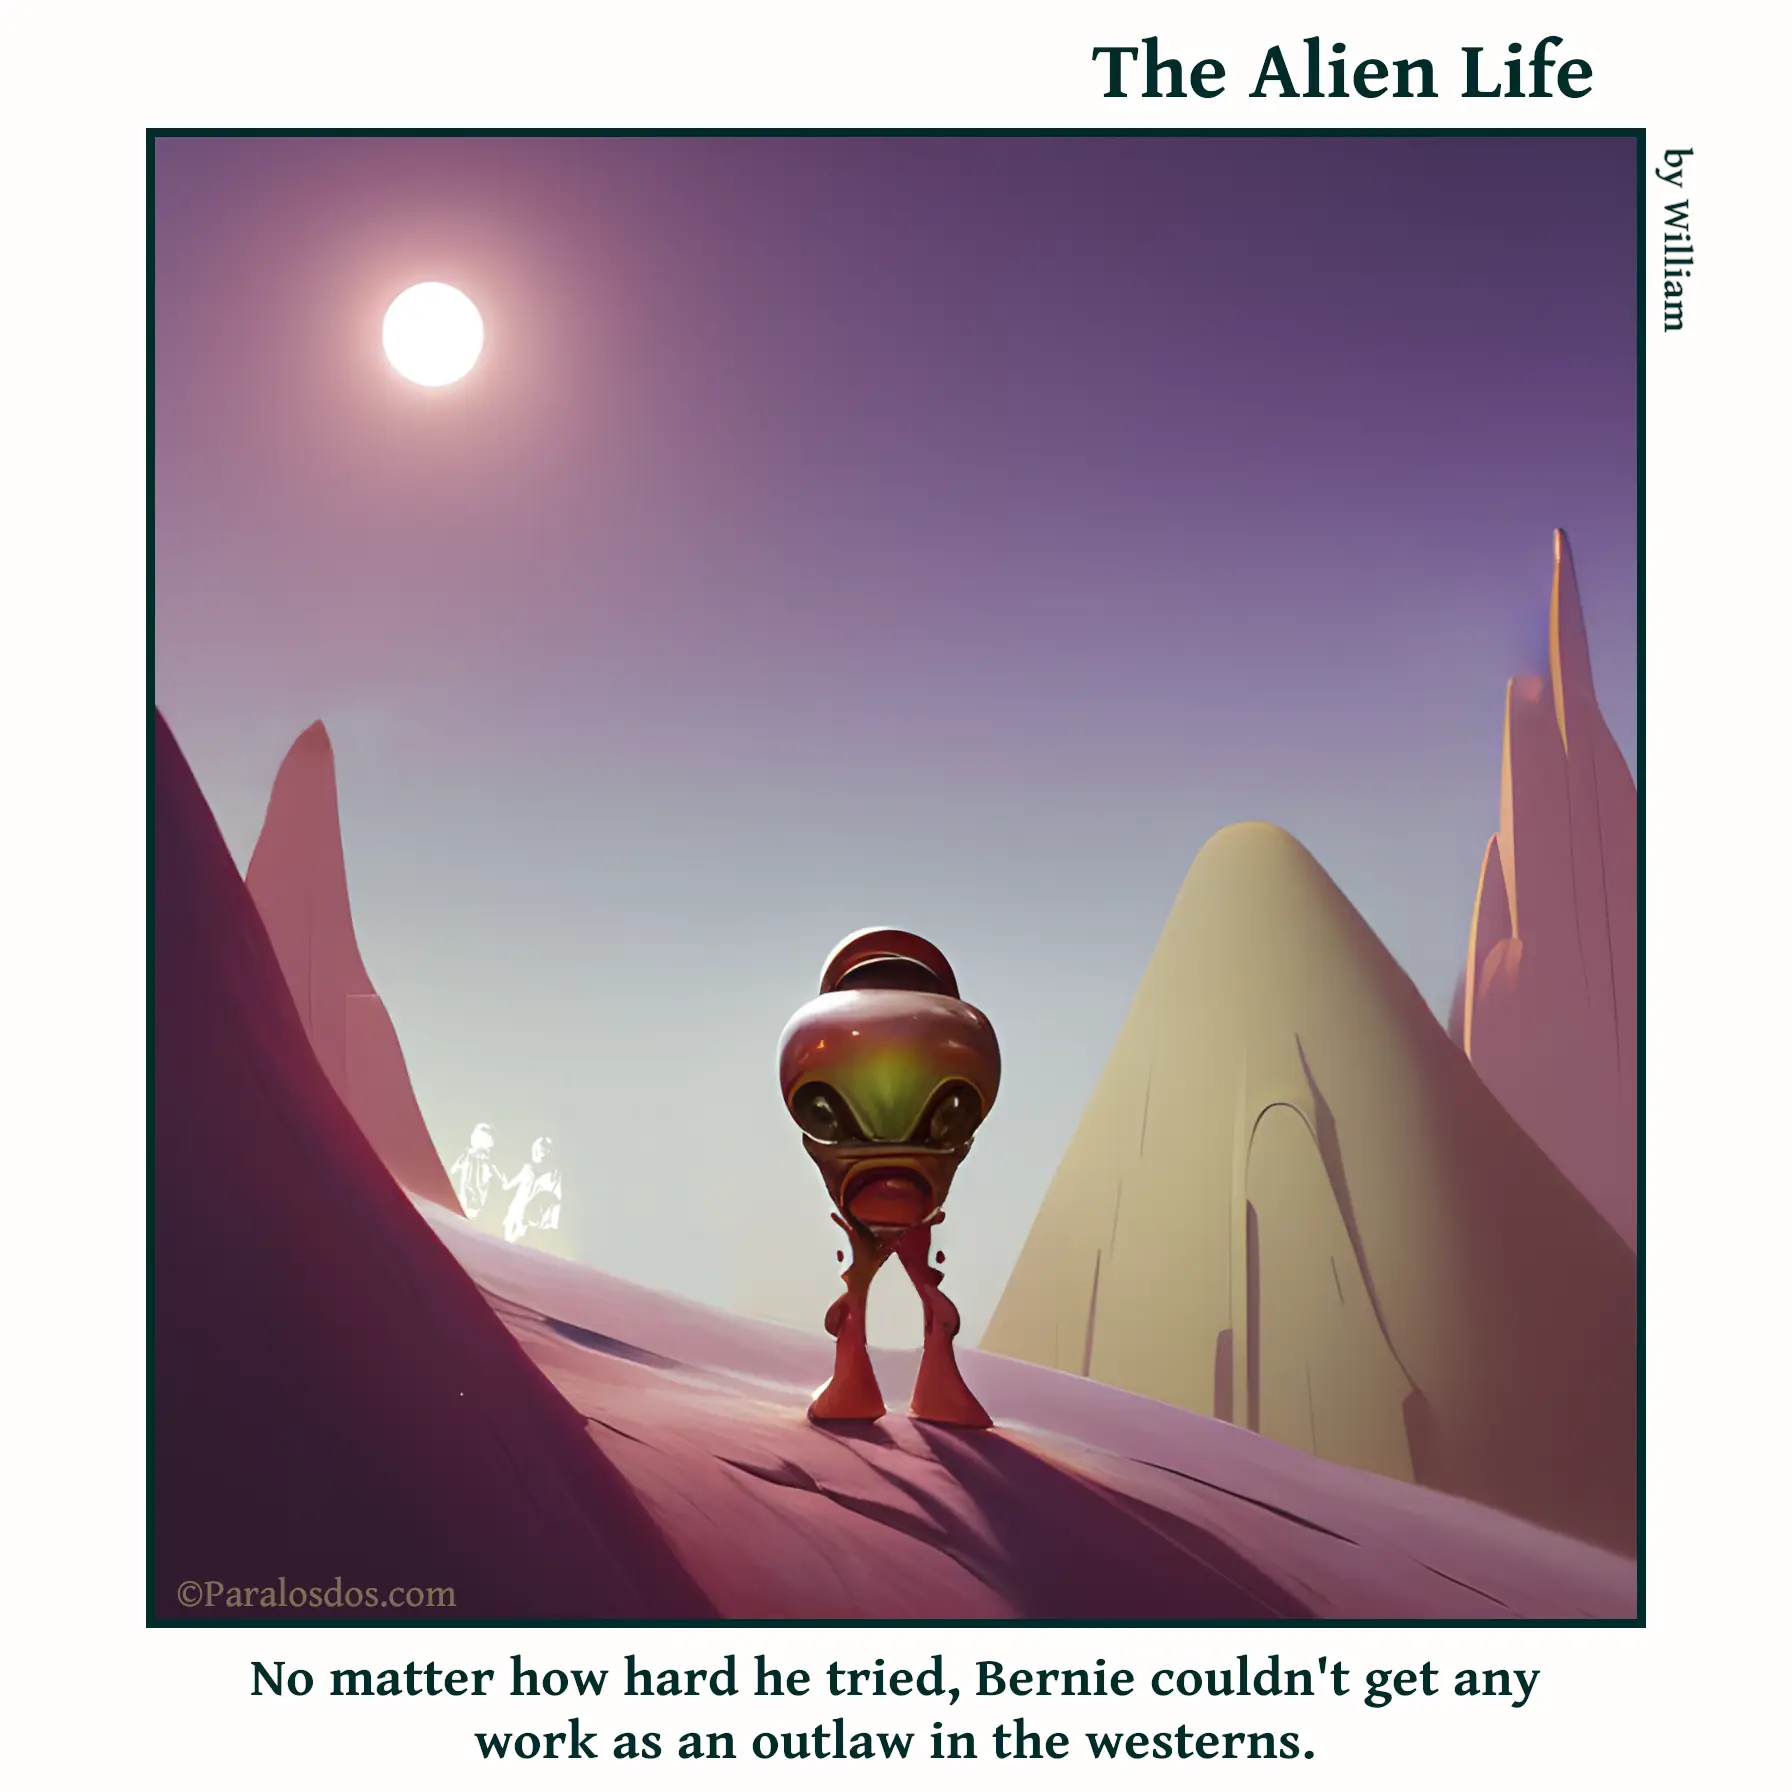 The Alien Life, one panel Comic. An alien who has the look of a wannabe western gunfighter is facing forward with a menacing look. The caption reads: No matter how hard he tried, Bernie couldn't get any work as an outlaw in the westerns.